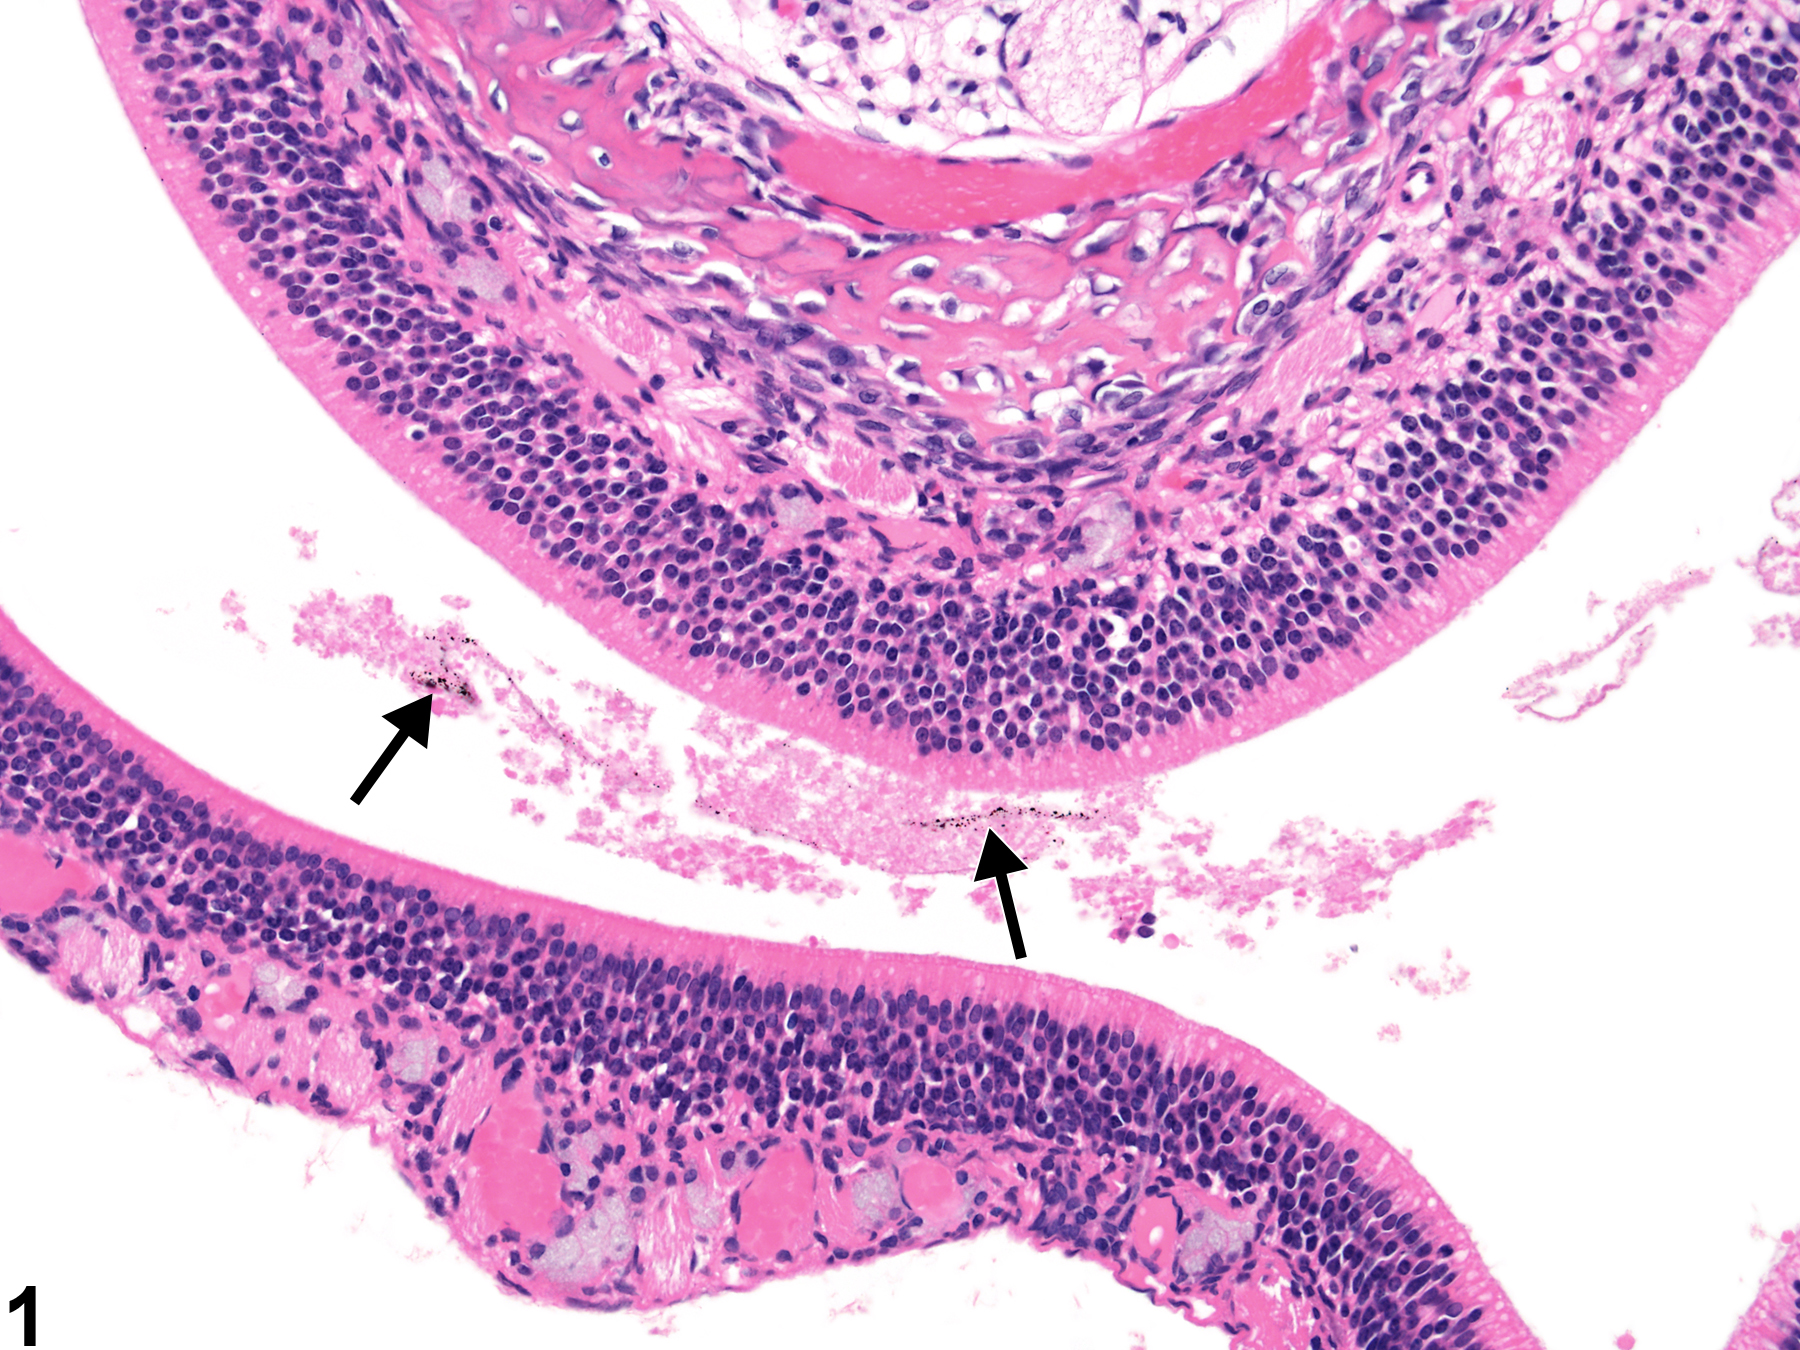 Image of foreign material in the nose from a female F344/Ntac rat in an acute study